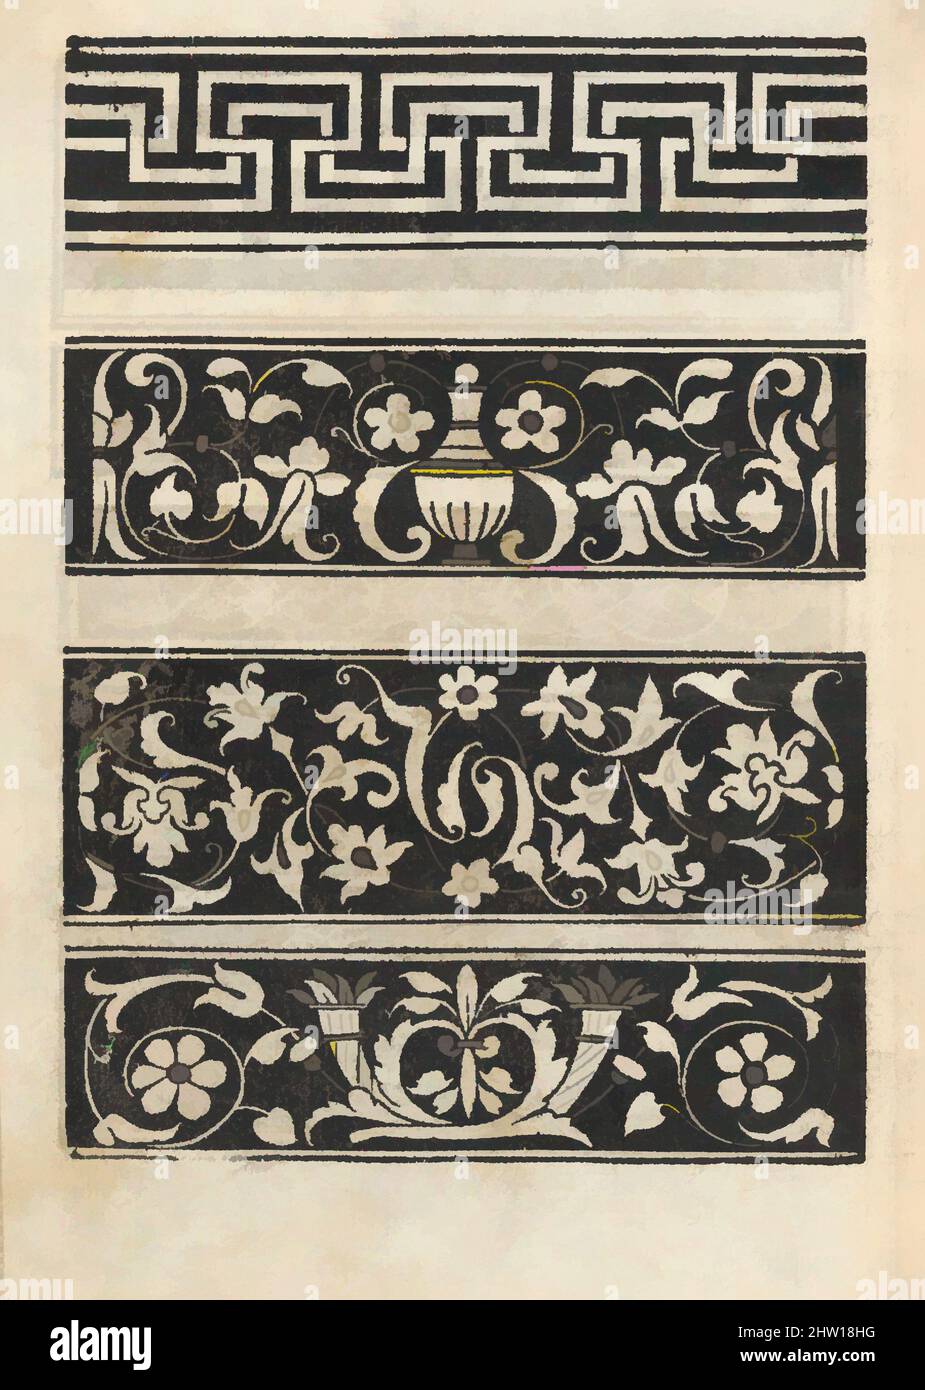 Art inspired by Essempio di recammi, page 22 (verso), 1530, Woodcut, Overall: 7 13/16 x 6 3/16 x 3/8 in. (19.8 x 15.7 x 1 cm), Written by Giovanni Antonio Tagliente, Italian, Venice ca. 1465-1527 Venice, published by Giovanantonio e i fratelli da Sabbio Venice. From top to bottom, and, Classic works modernized by Artotop with a splash of modernity. Shapes, color and value, eye-catching visual impact on art. Emotions through freedom of artworks in a contemporary way. A timeless message pursuing a wildly creative new direction. Artists turning to the digital medium and creating the Artotop NFT Stock Photo